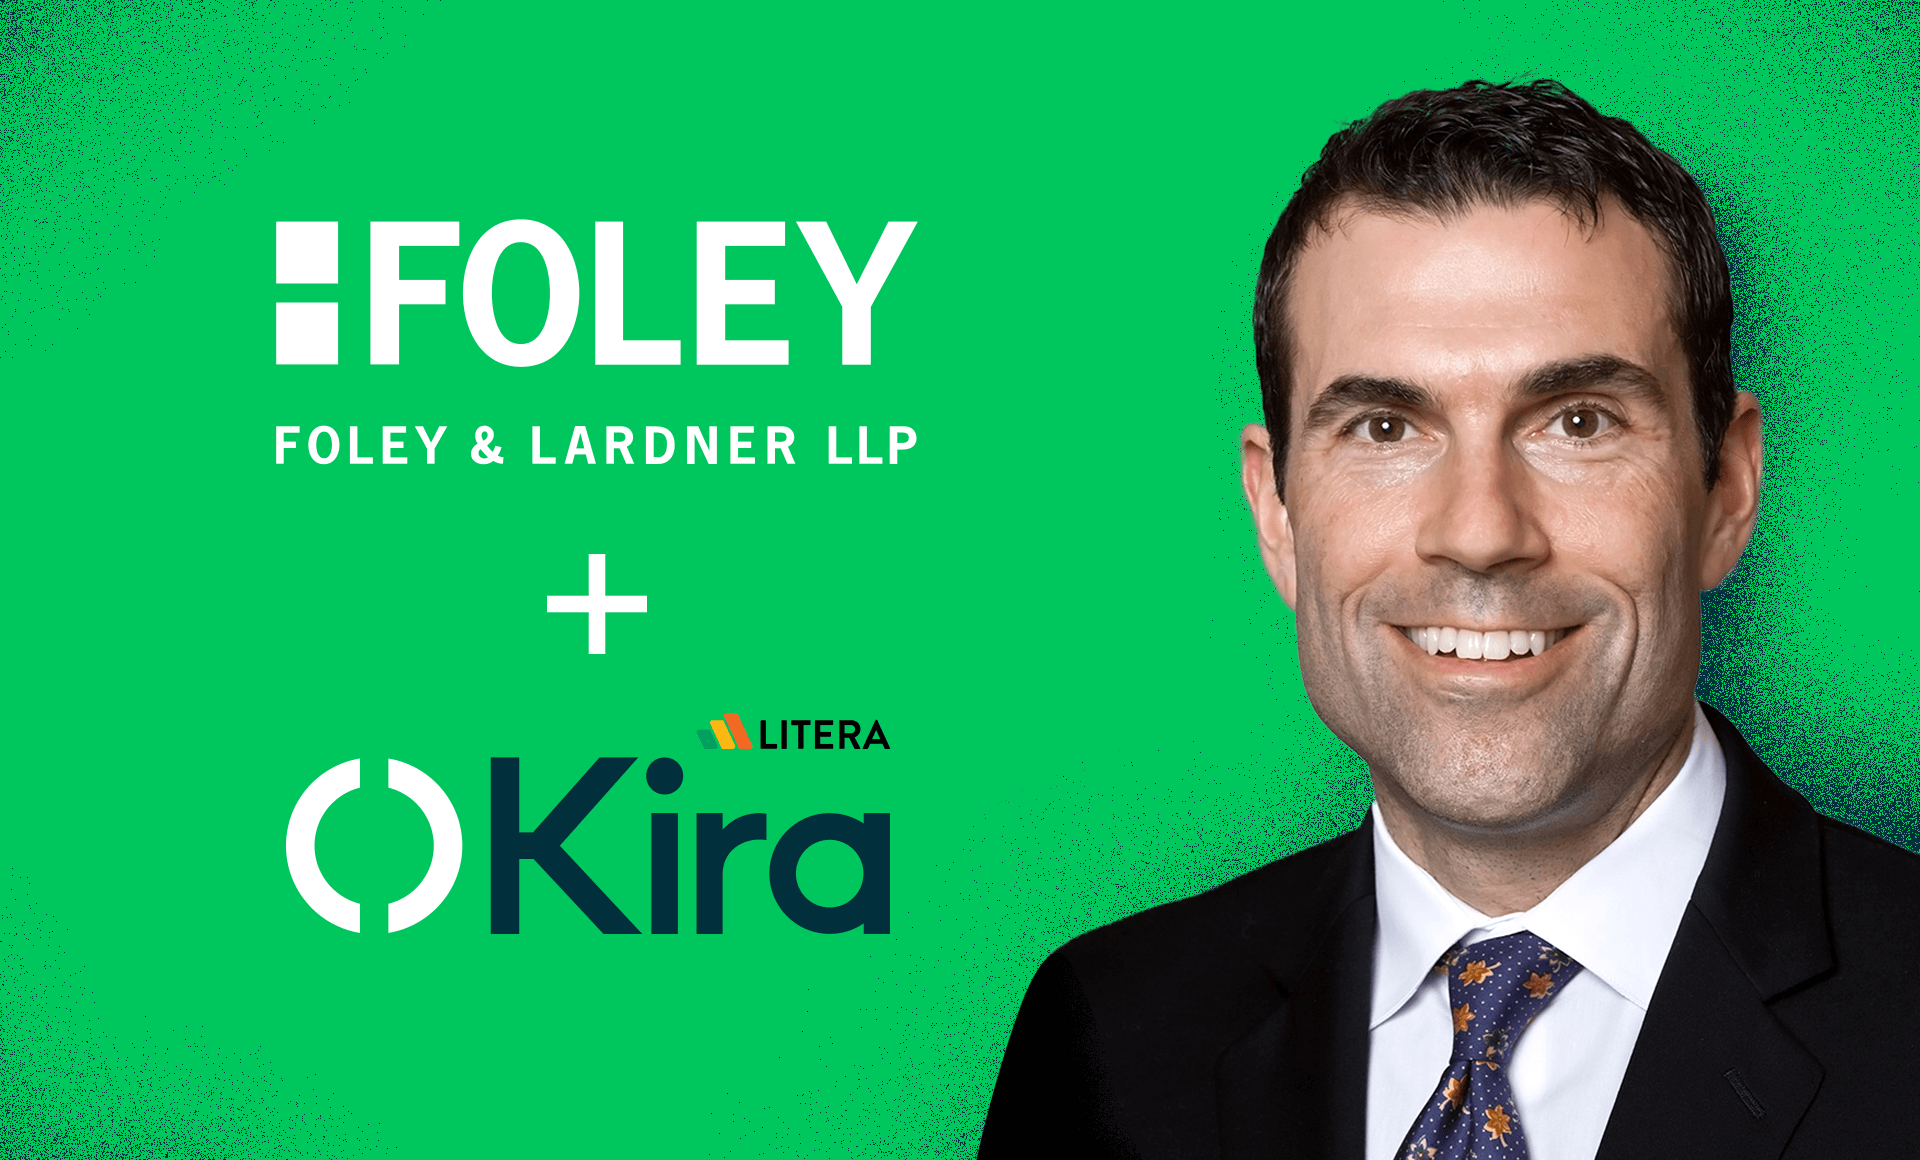 Read more about Foley & Lardner Adopts Kira Across Its Mergers and Acquisitions Practice To Enhance Due Diligence Processes